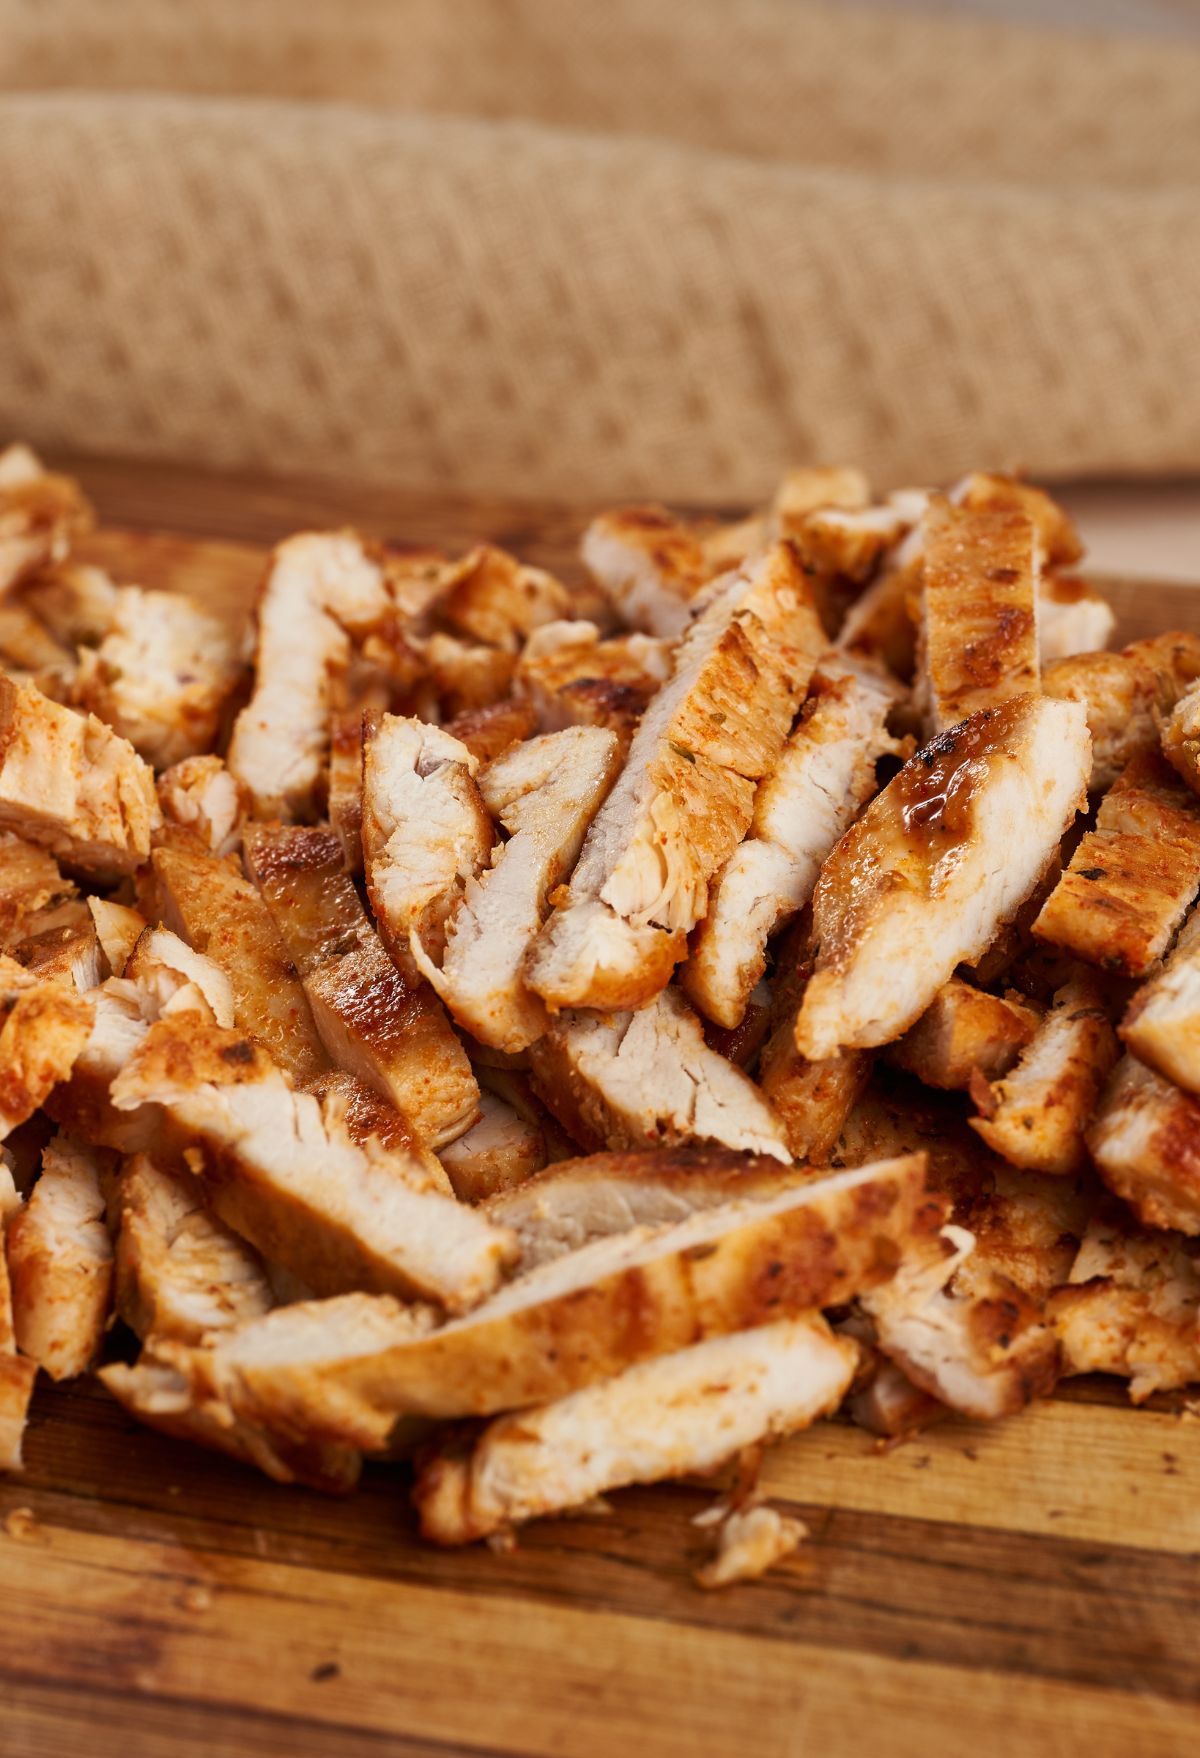 Sliced grilled chicken breast on a wooden cutting board.